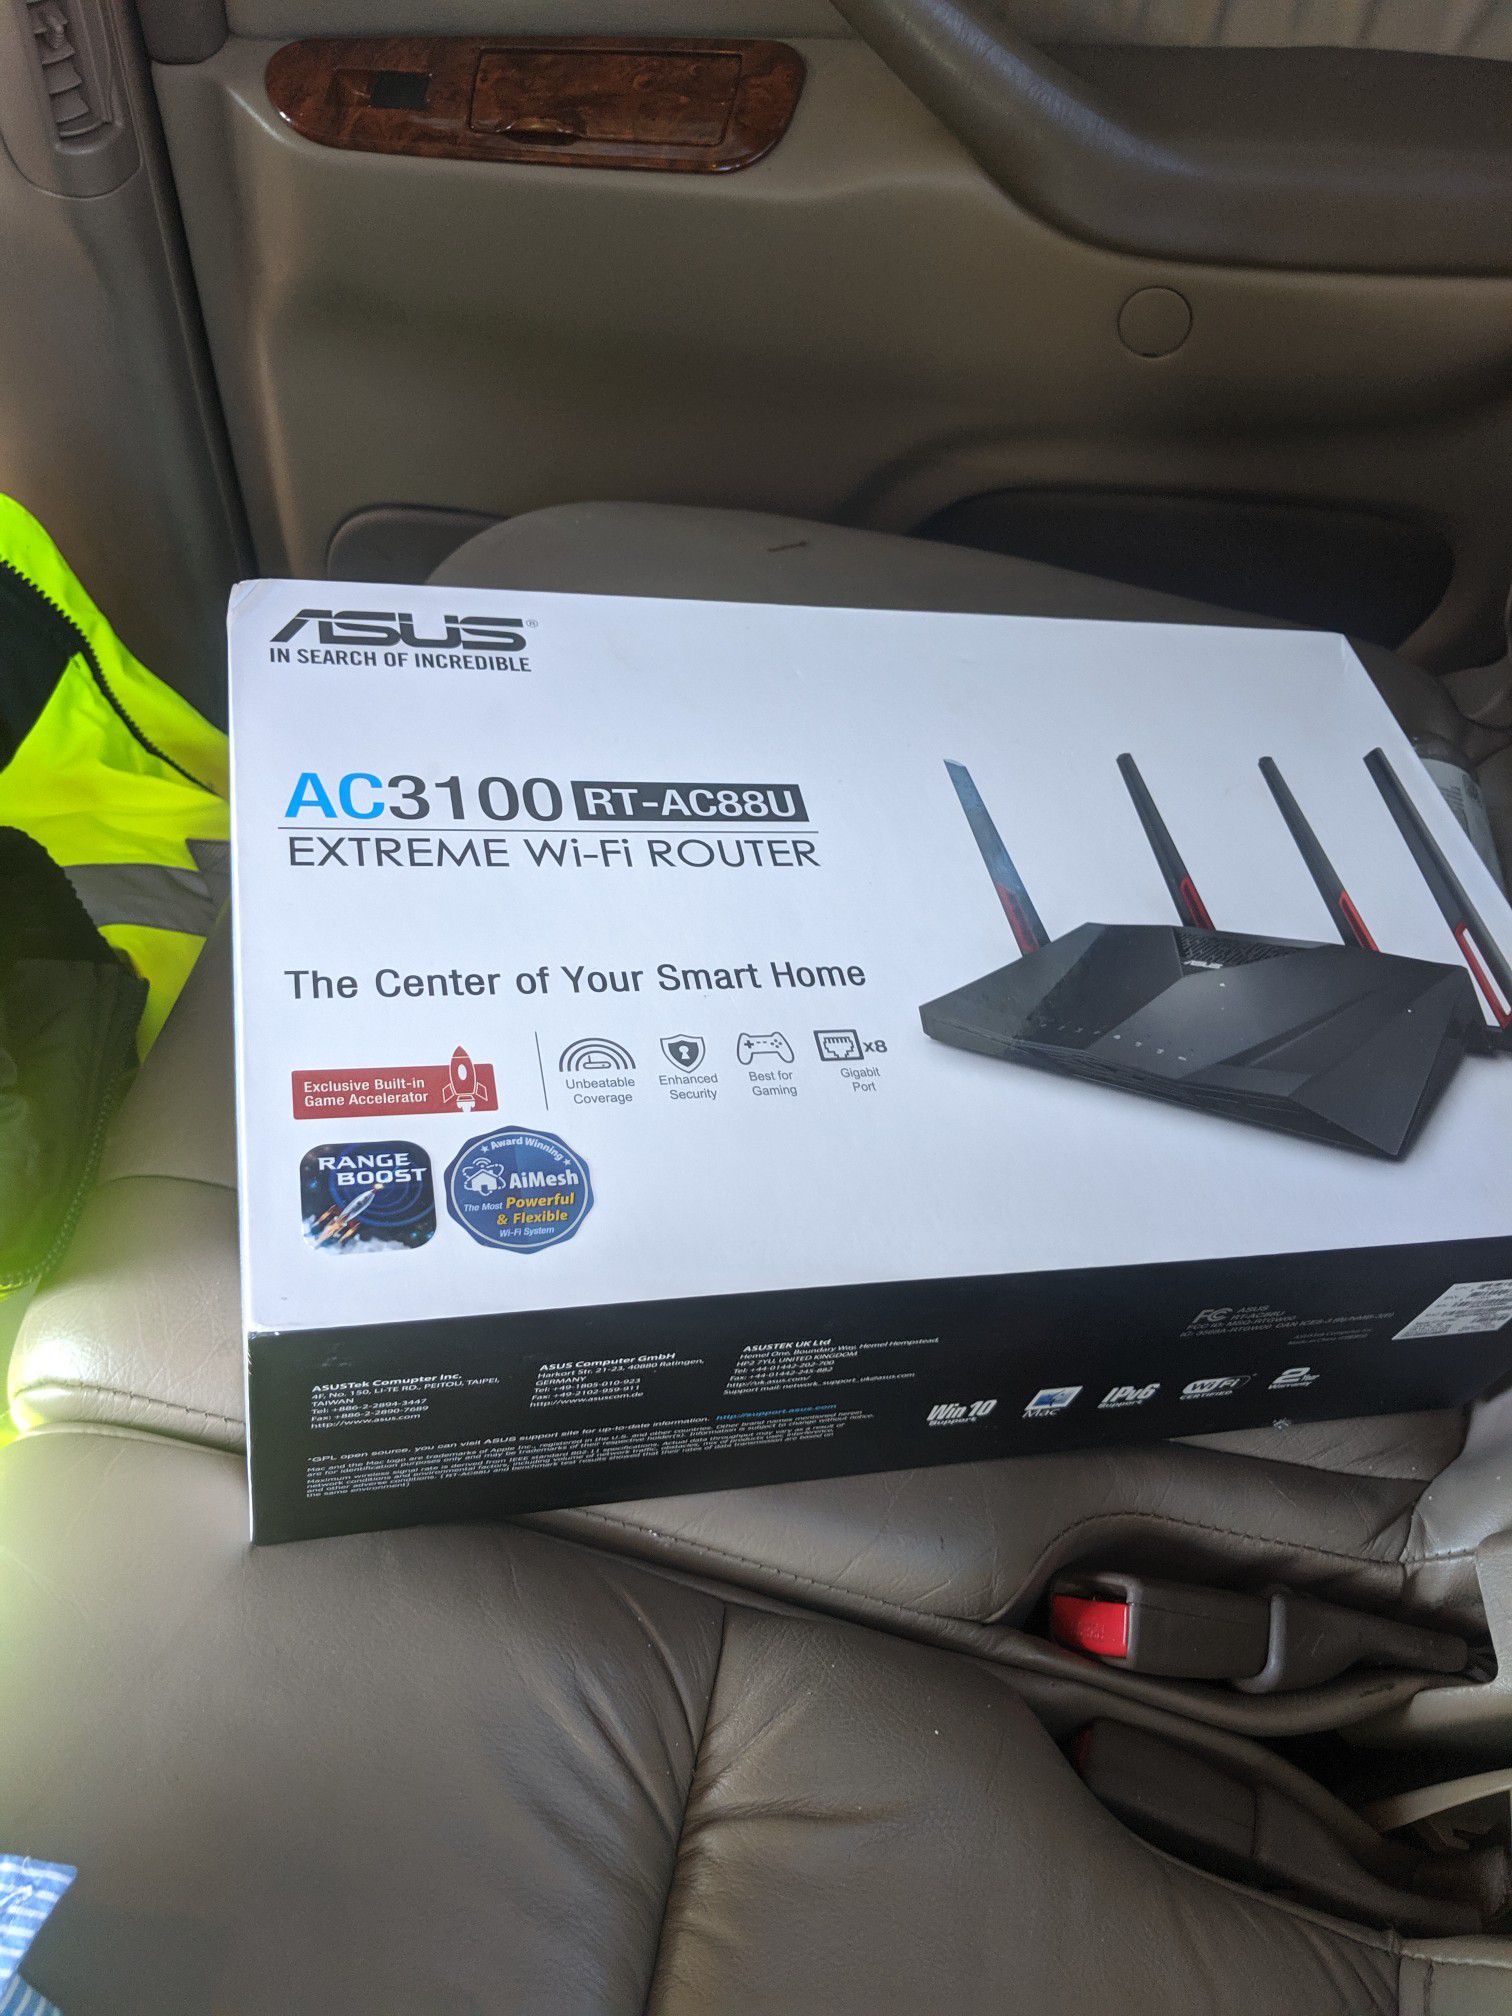 Asus Gaming router